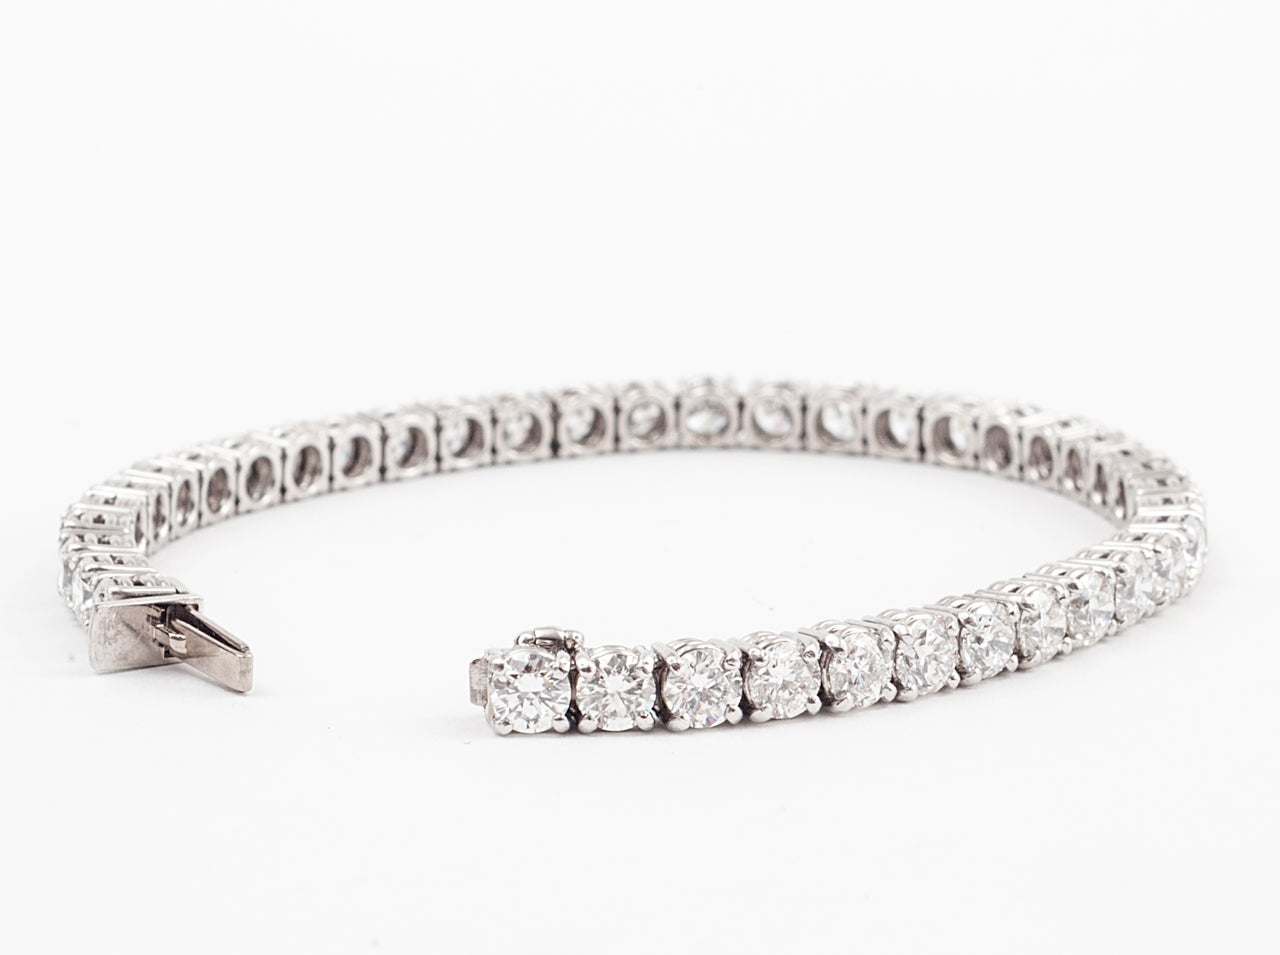 A superbly hand mounted platinum and diamond bracelet. The premium round brilliant cut diamonds are all D-F in colour and are of VVS-VS clarity with a total weight of approximately 11.58 carats. The mounting is particularly fine and the bracelet